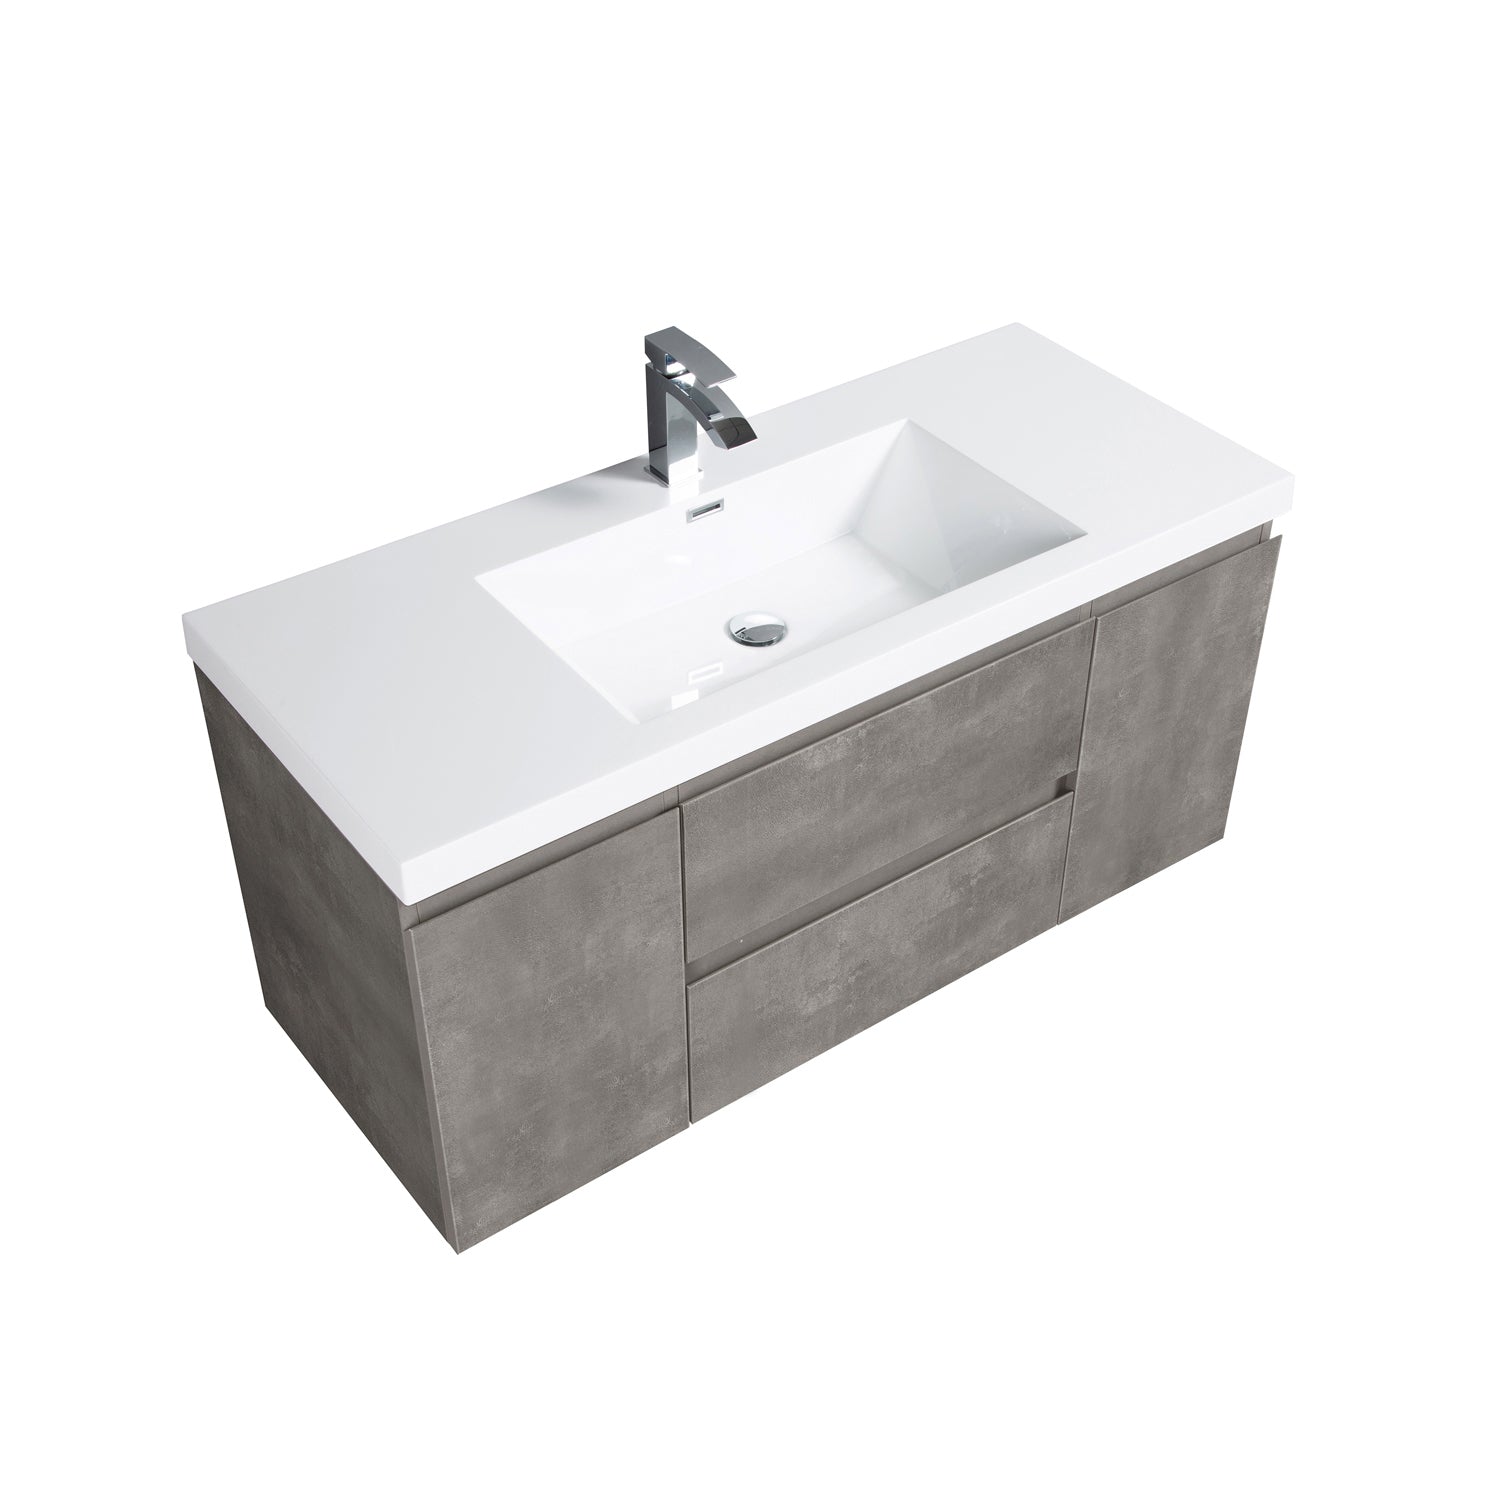 Sinber 48" Wall Mounted Single Rectangular Sink Bathroom Vanity Cabinet with White Acrylic Countertop 2 Doors and 2 Drawers, Compact and Elegant with Sleek Design for Modern Bathrooms